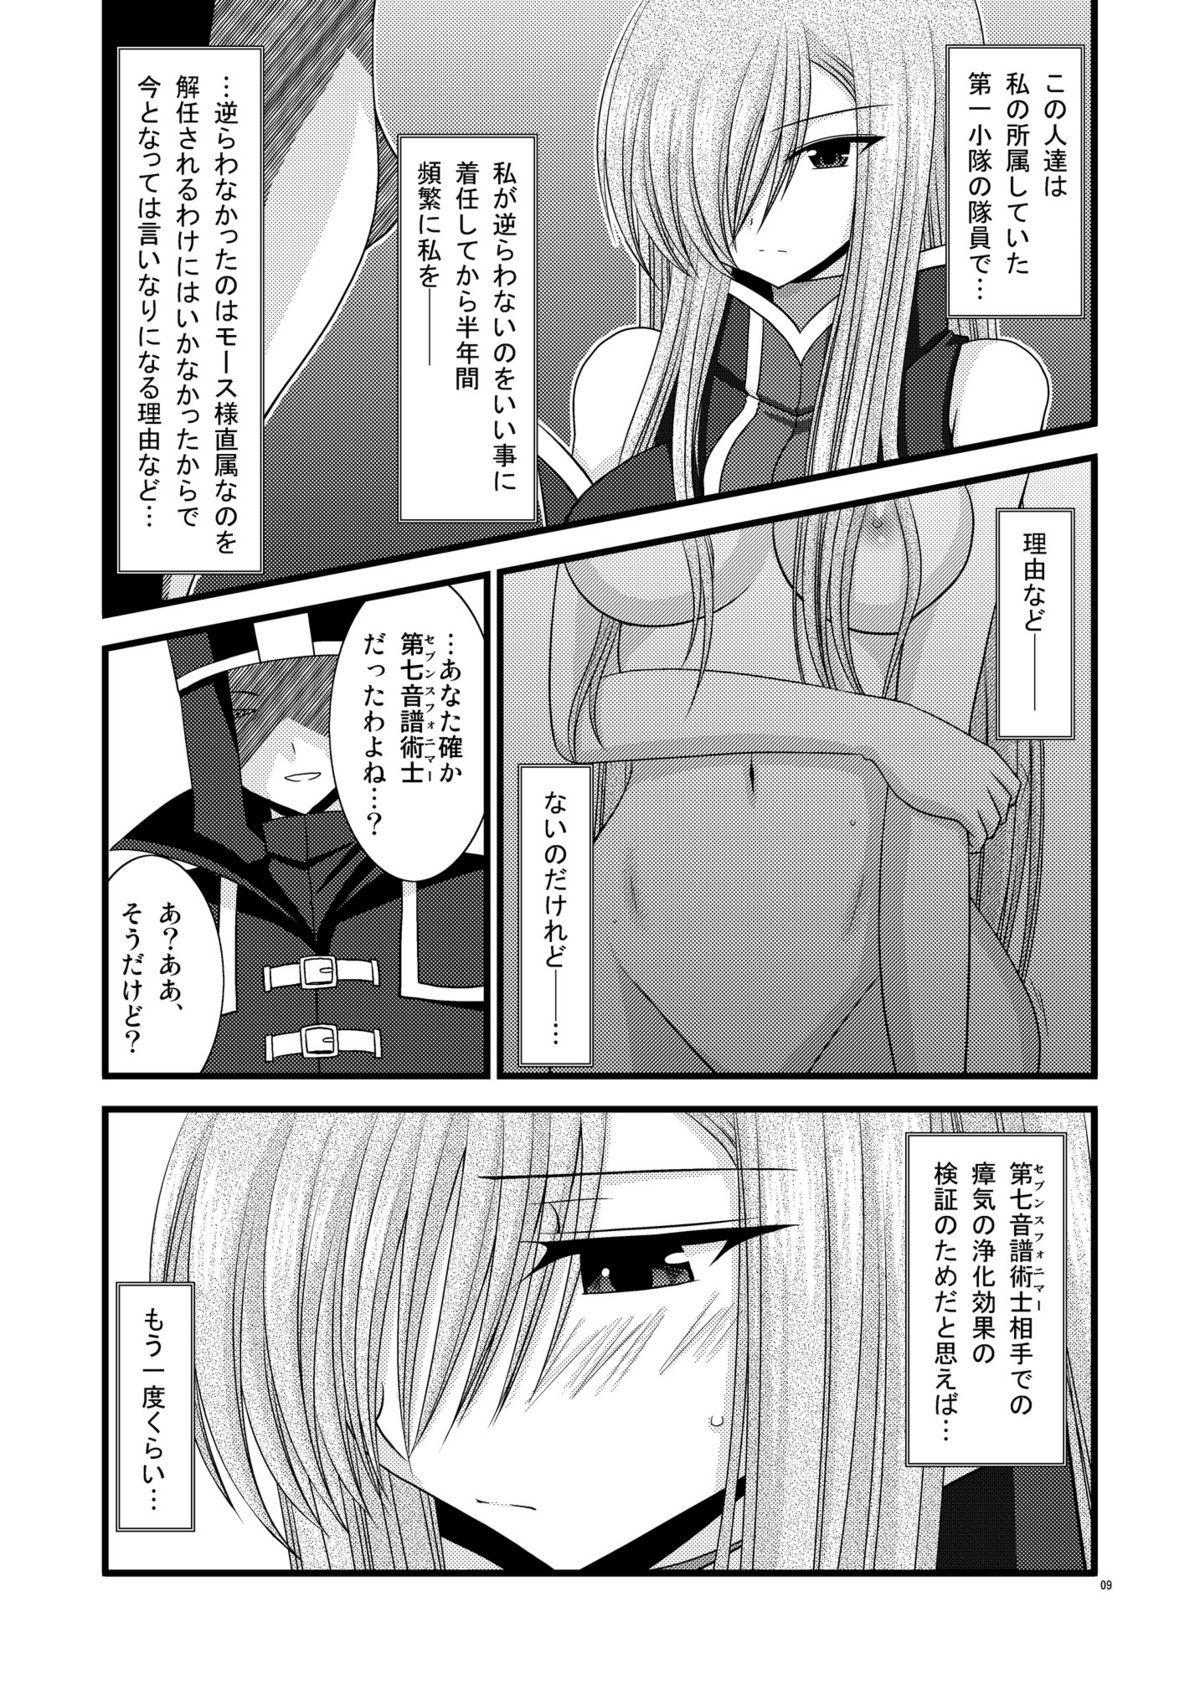 Shaking Melon Ni Kubittake! 4 - Tales of the abyss Toy - Page 8